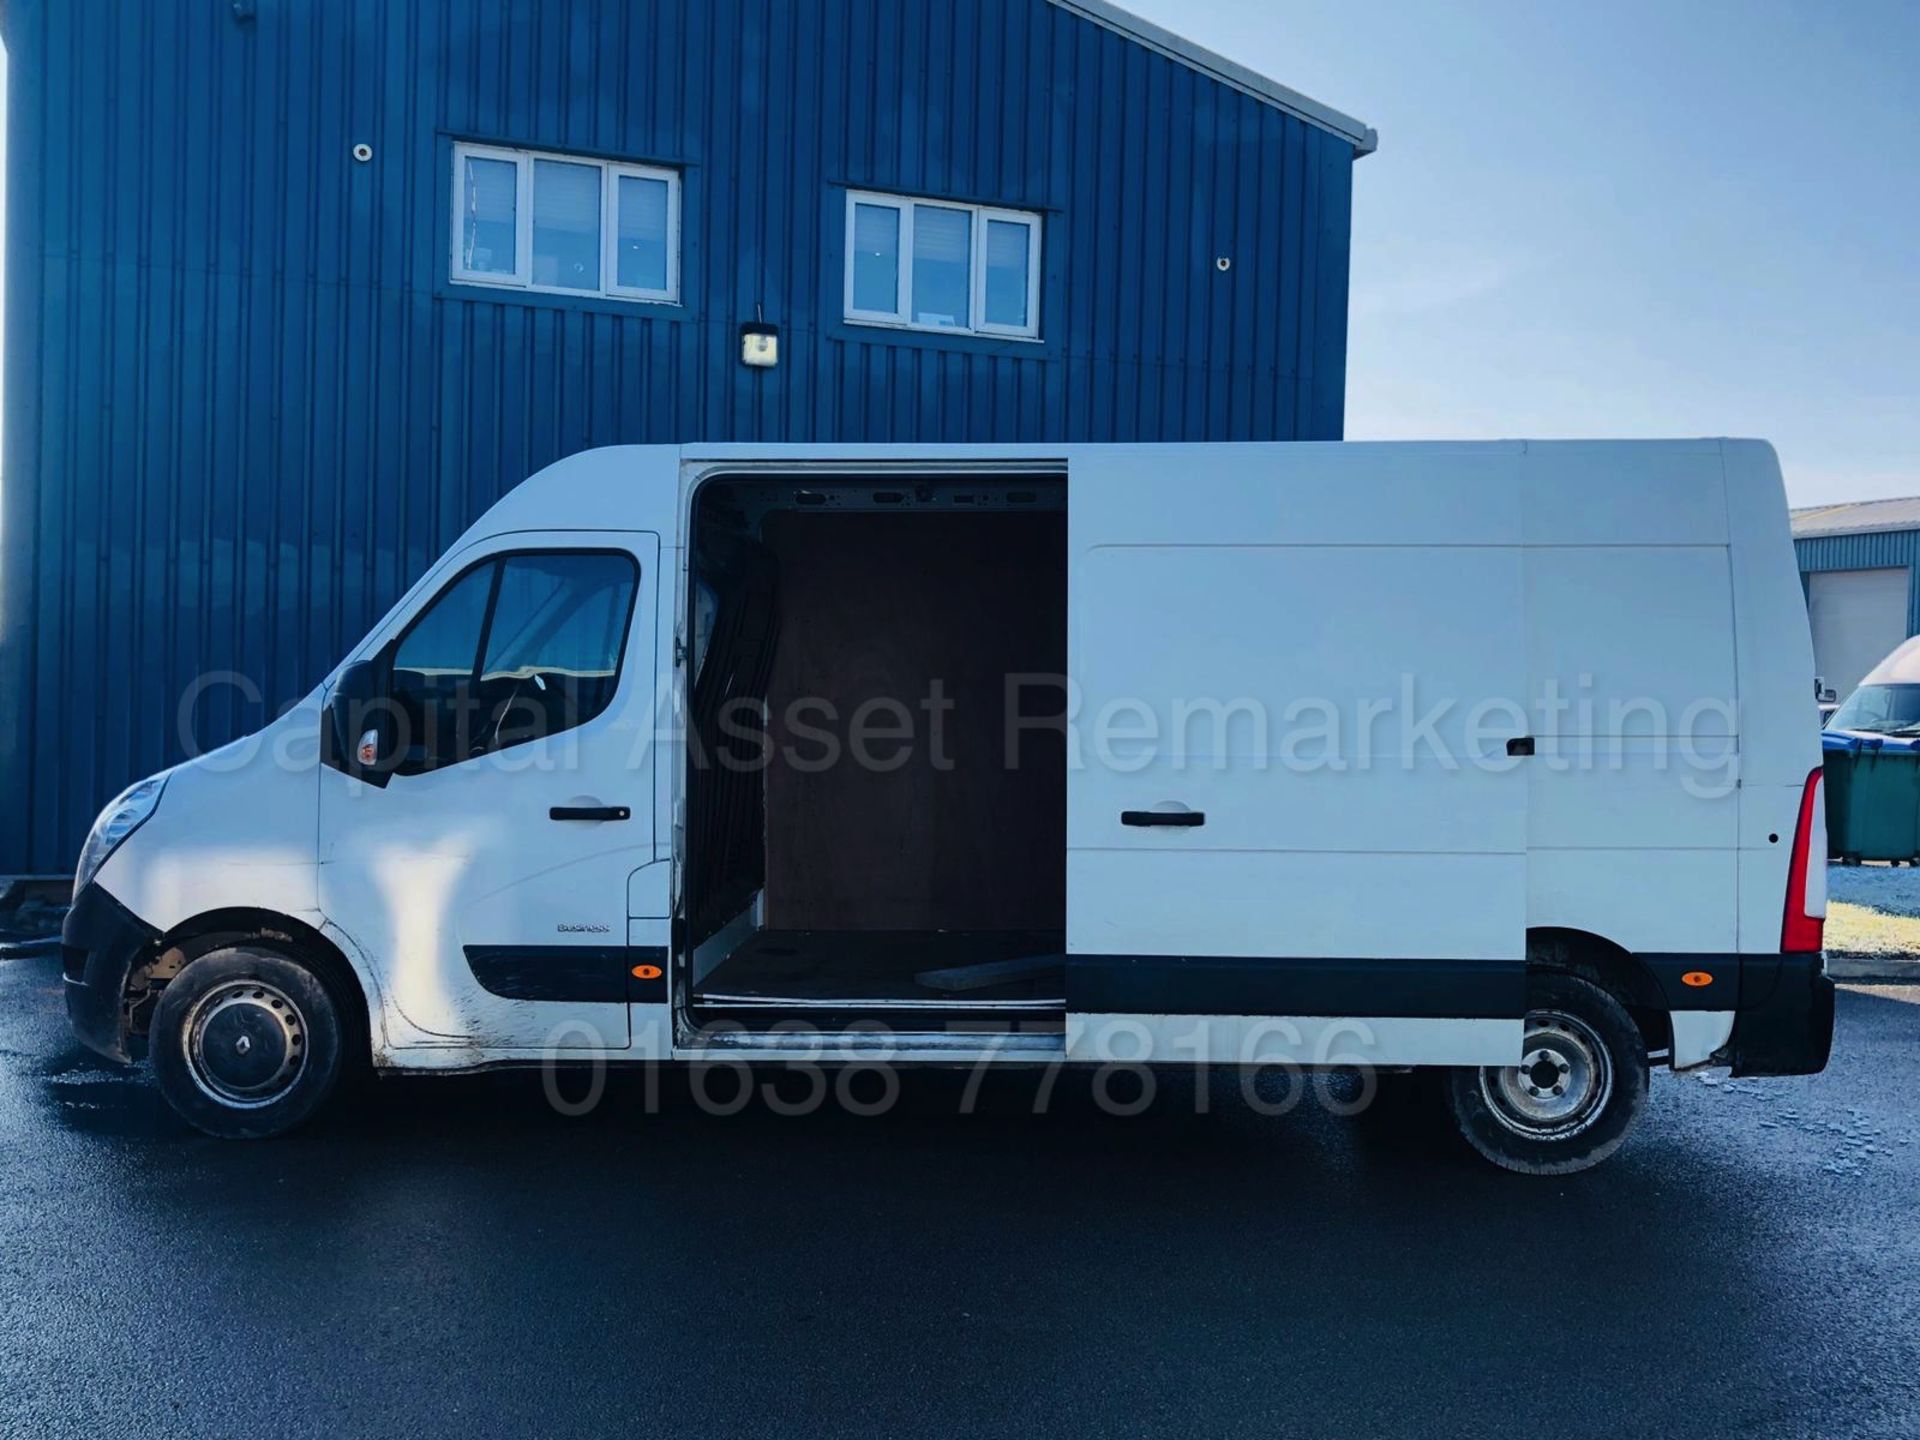 RENAULT MASTER LM35 *LWB - BUSINESS EDITION* (2016) '2.3 DCI - 110 BHP - 6 SPEED' *ULTRA LOW MILES* - Image 10 of 23